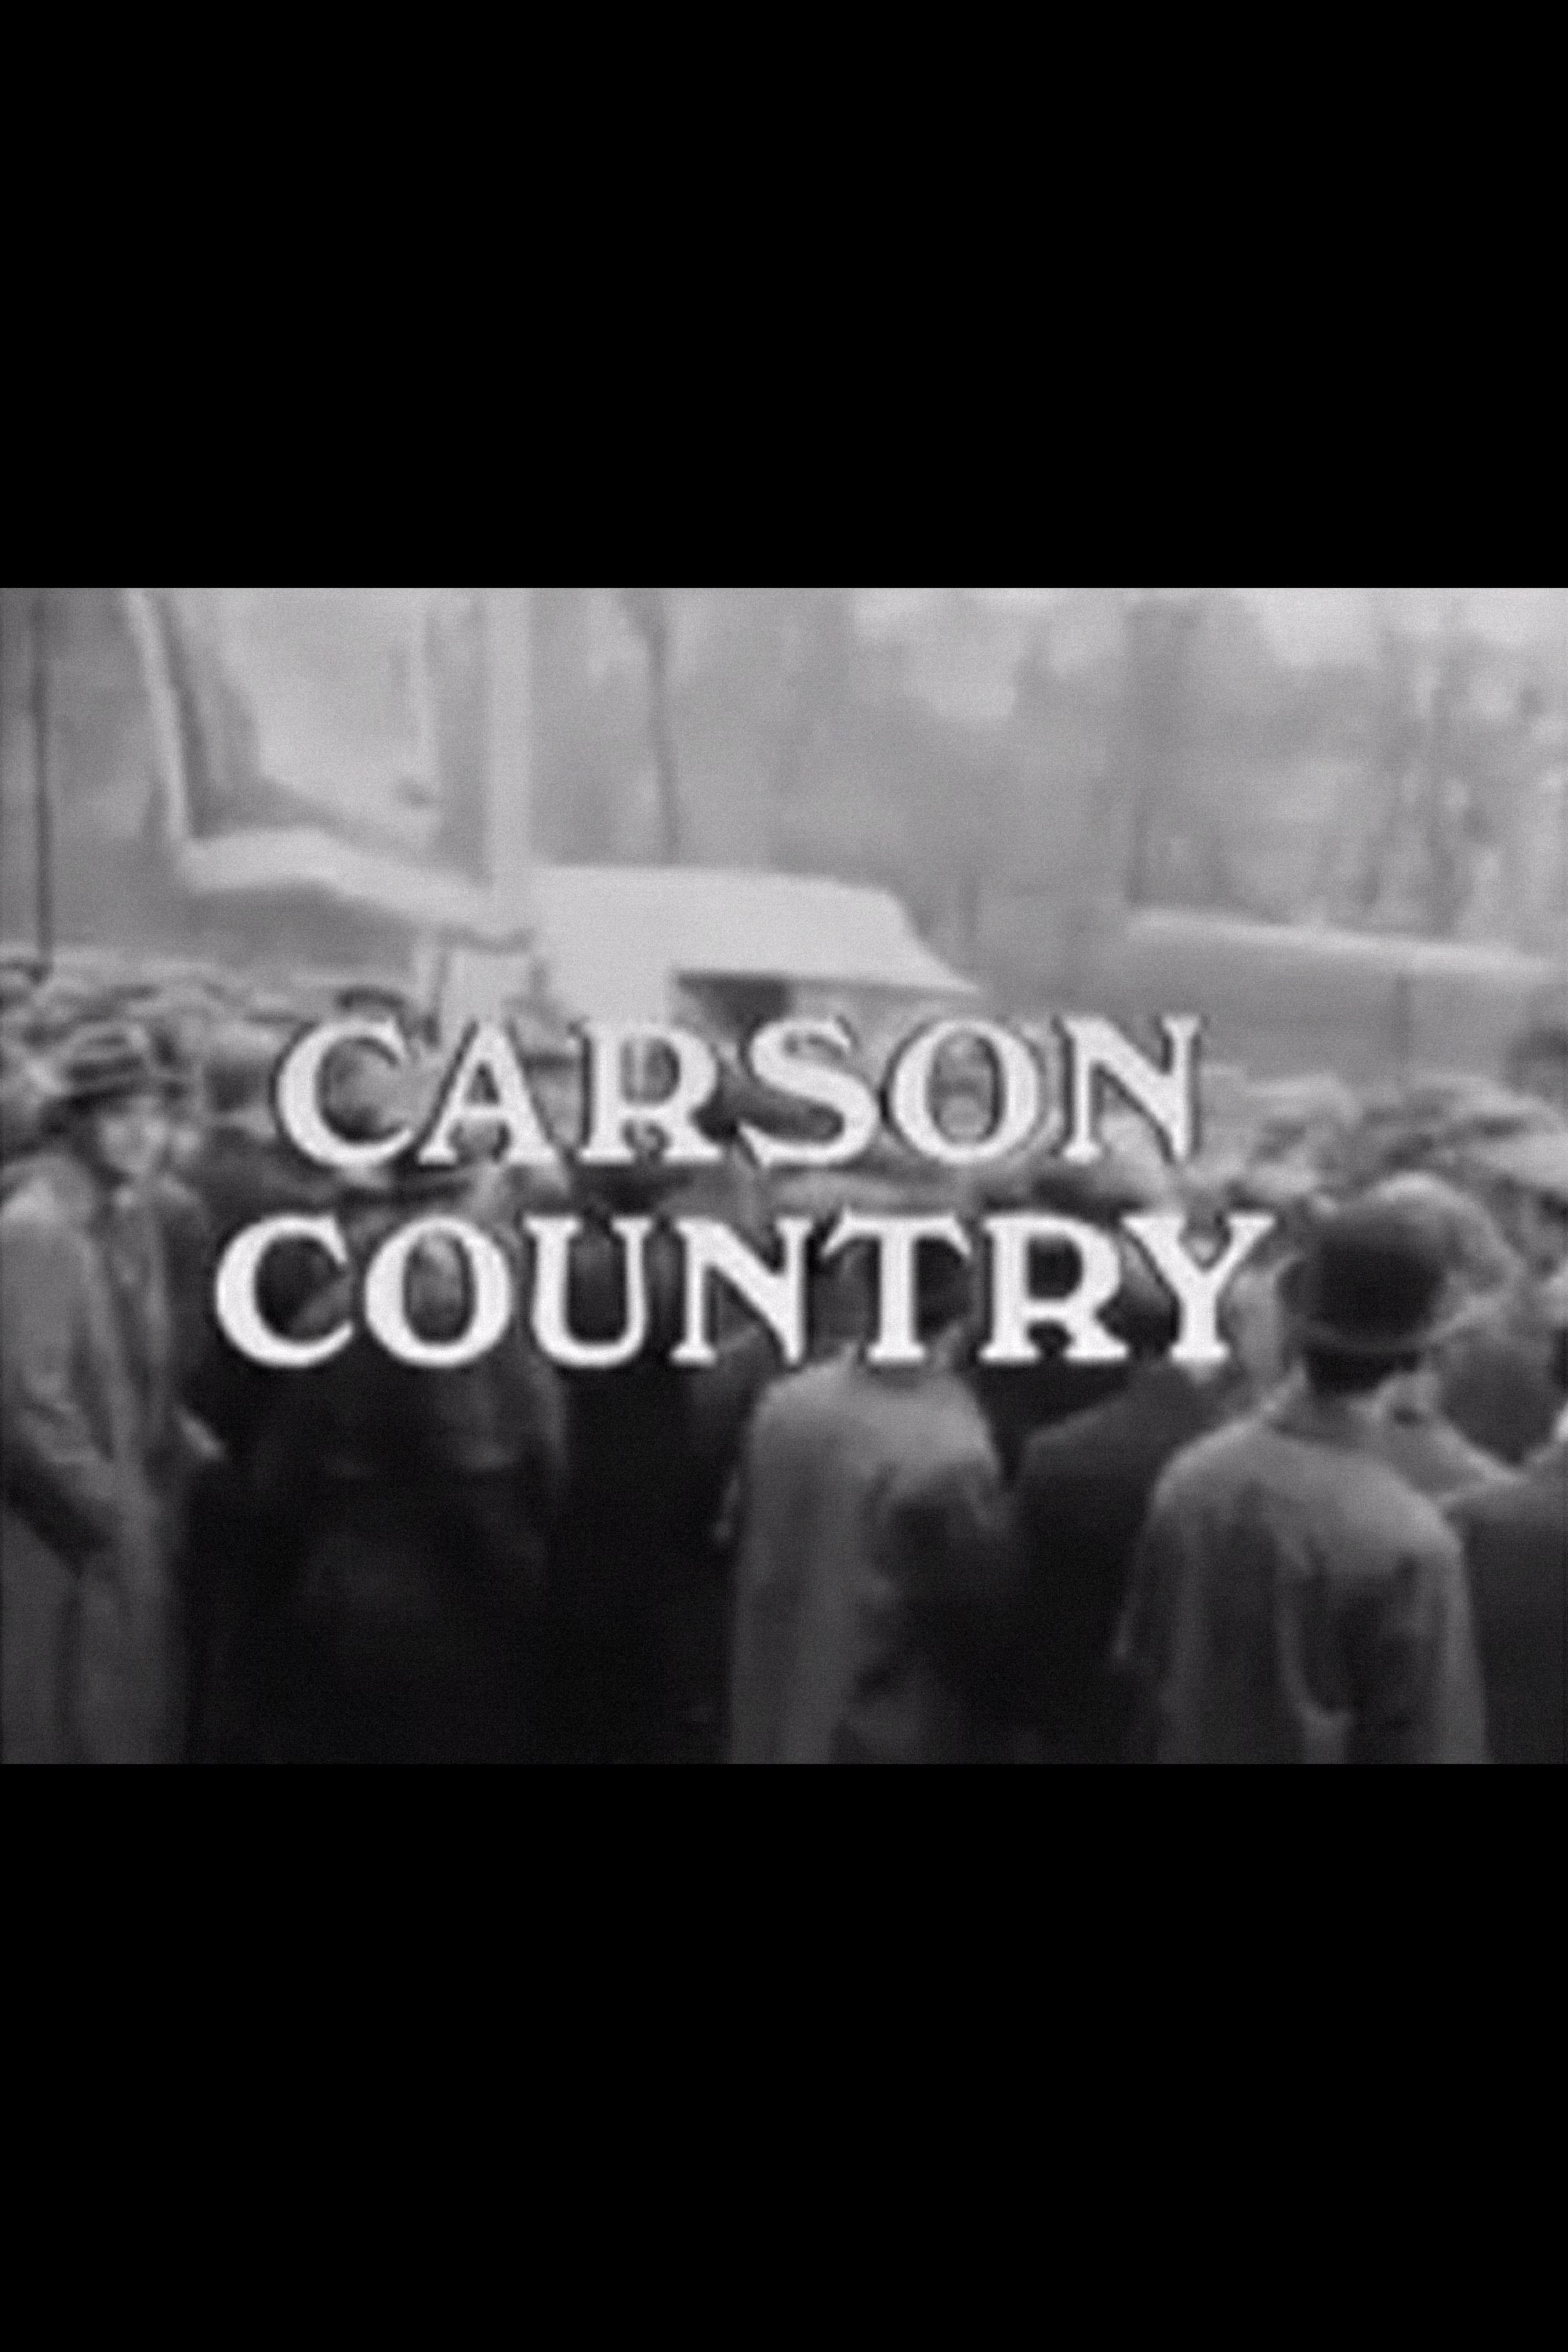 Carson Country